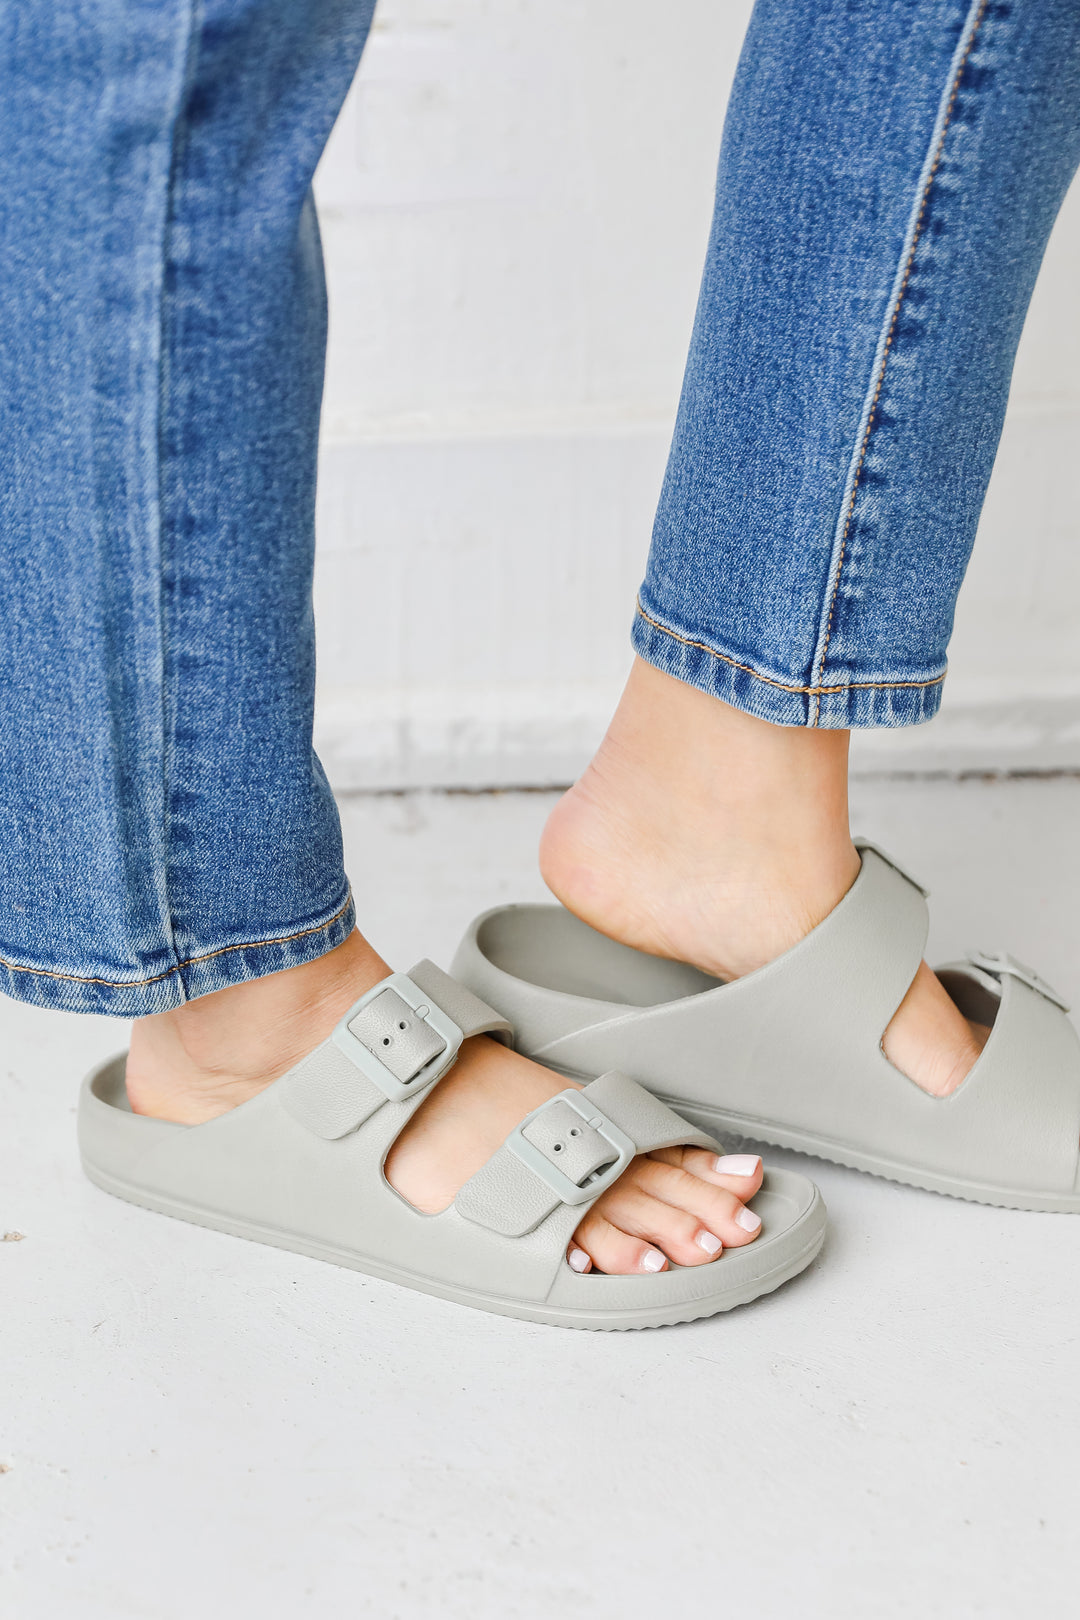 Double Strap Sandals in sage